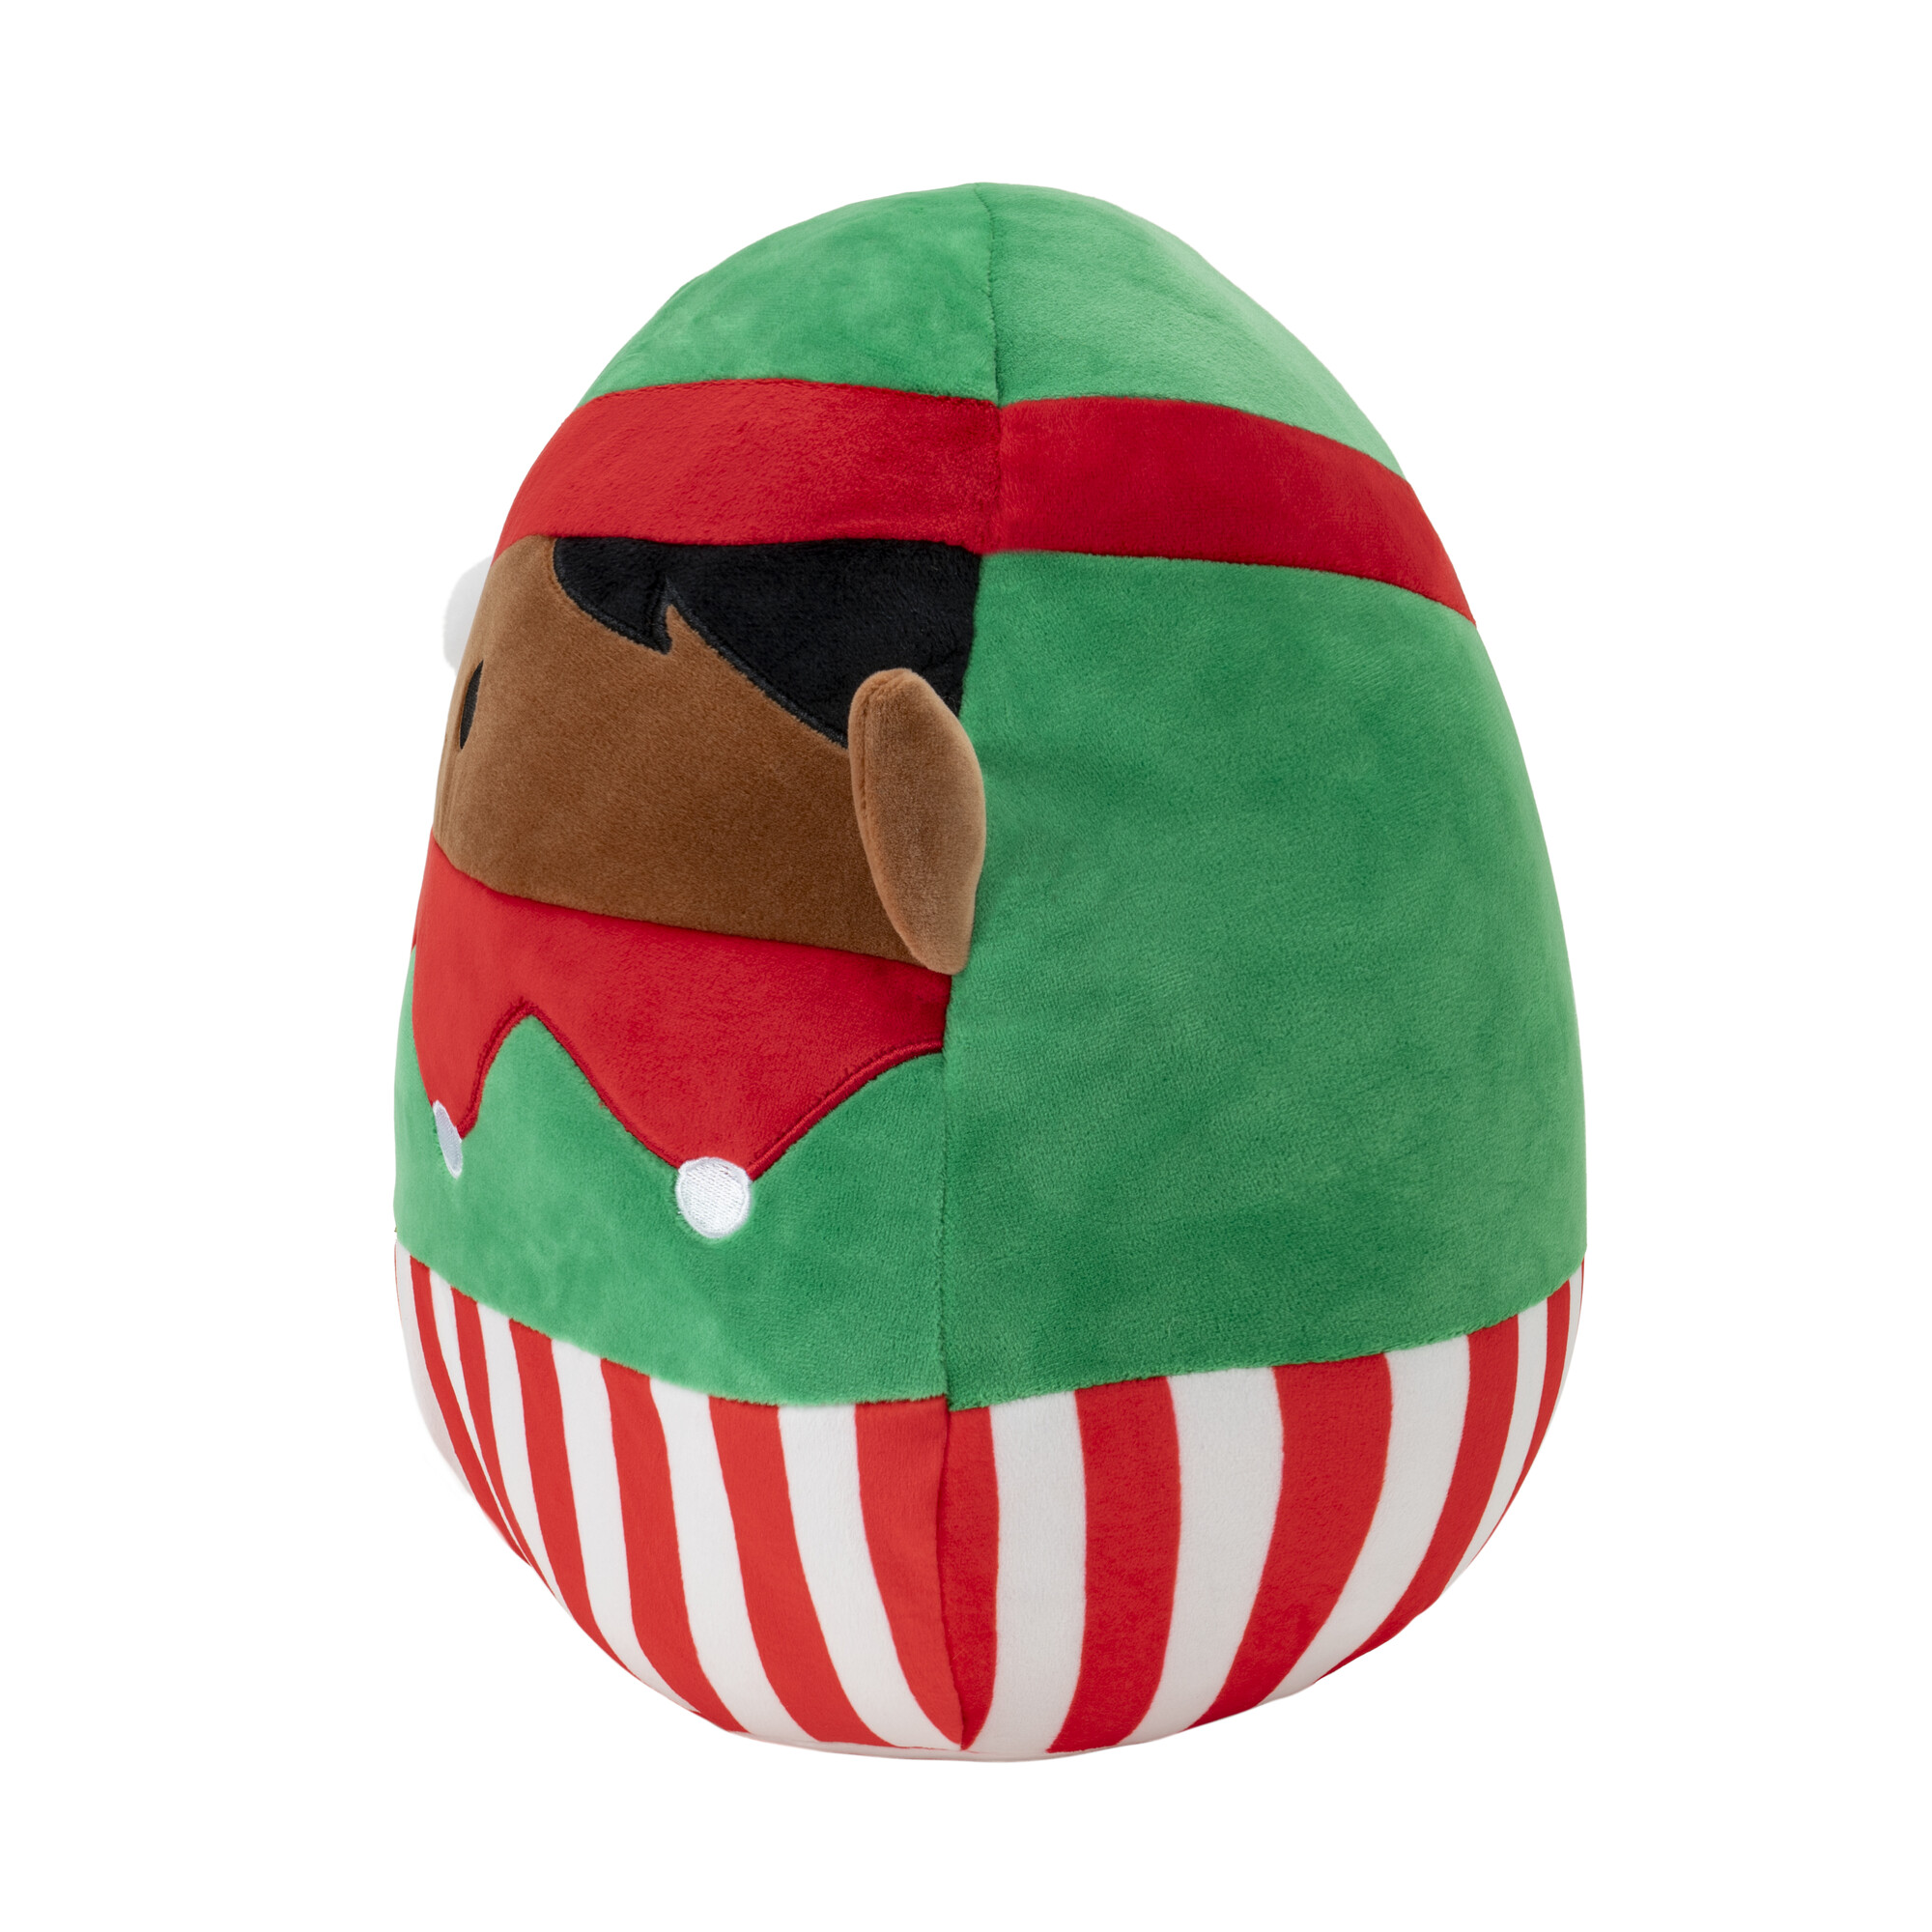 Squishmallows 12 inch Ezrah the Red and Green Elf Boy - Child's Ultra Soft Stuffed Plush Toy - image 5 of 7